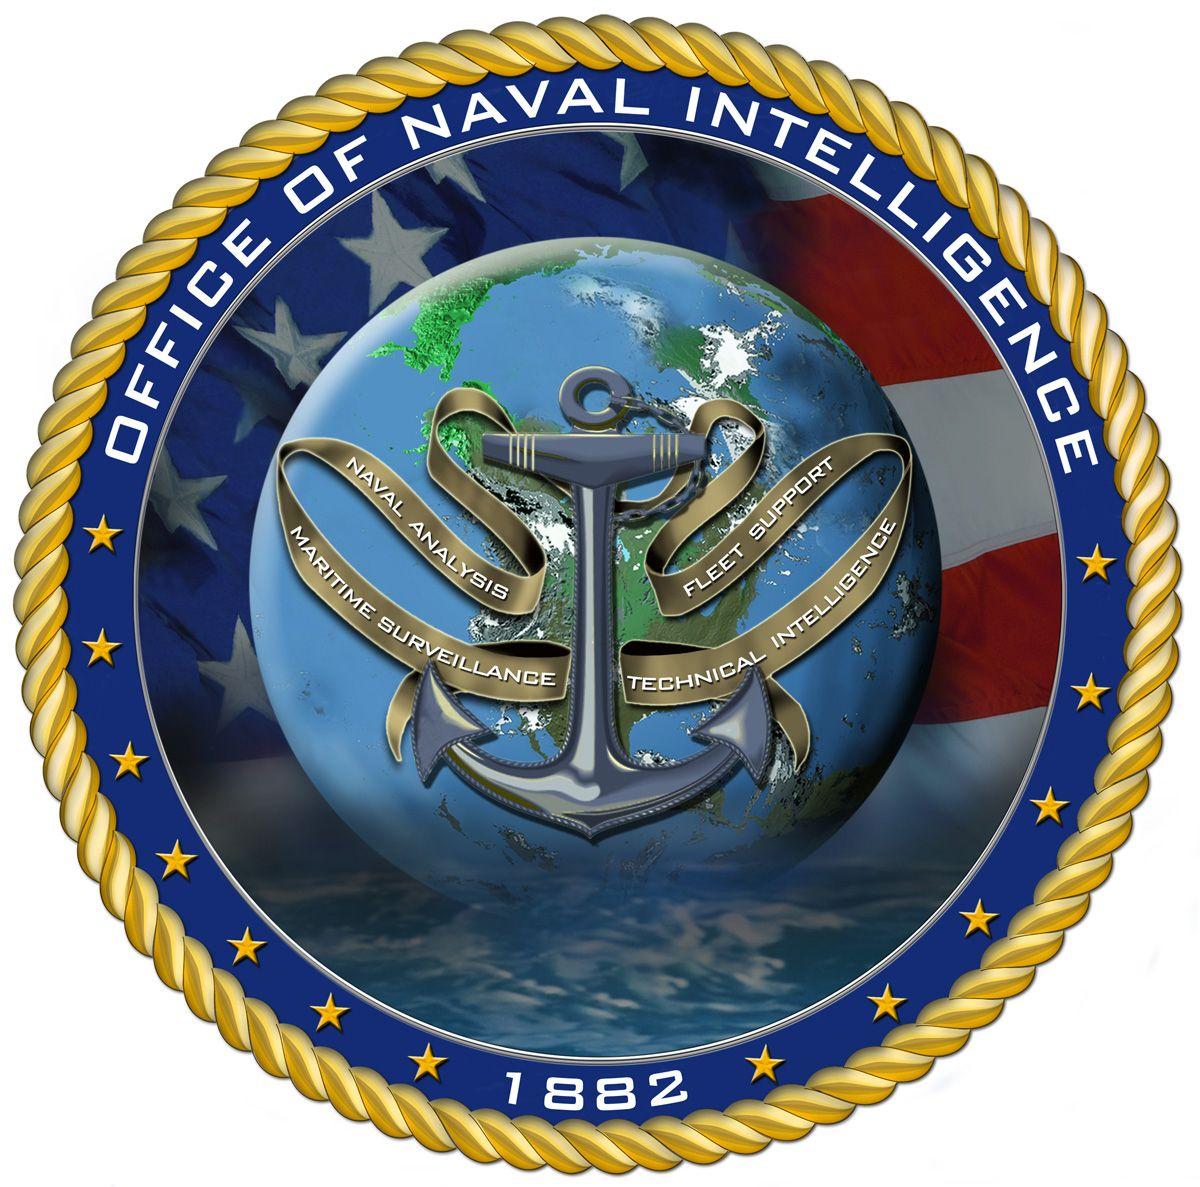 Naval Logo - Office of Naval Intelligence - Wikiwand